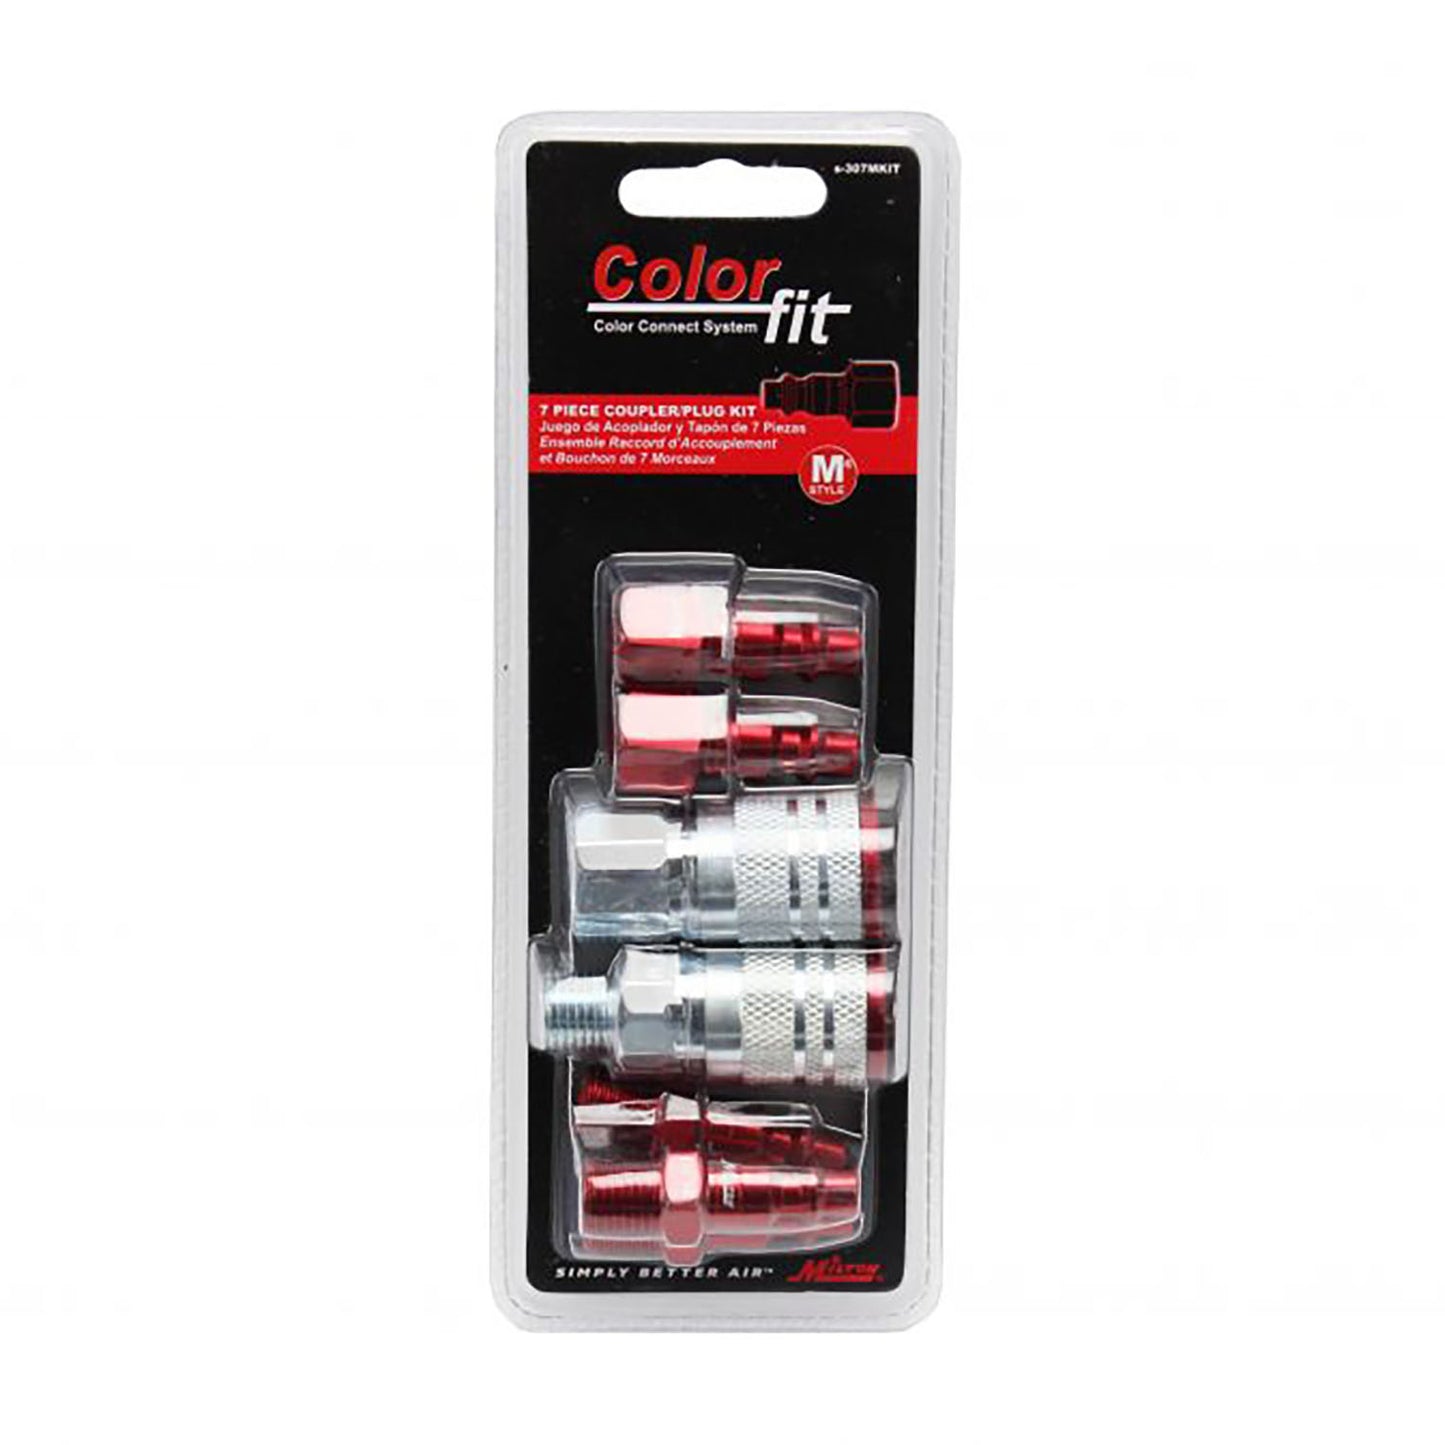 Milton ColorFit M Style coupler and Plug Kit 1/4" NPT 7 Pieces S-307MKIT Red